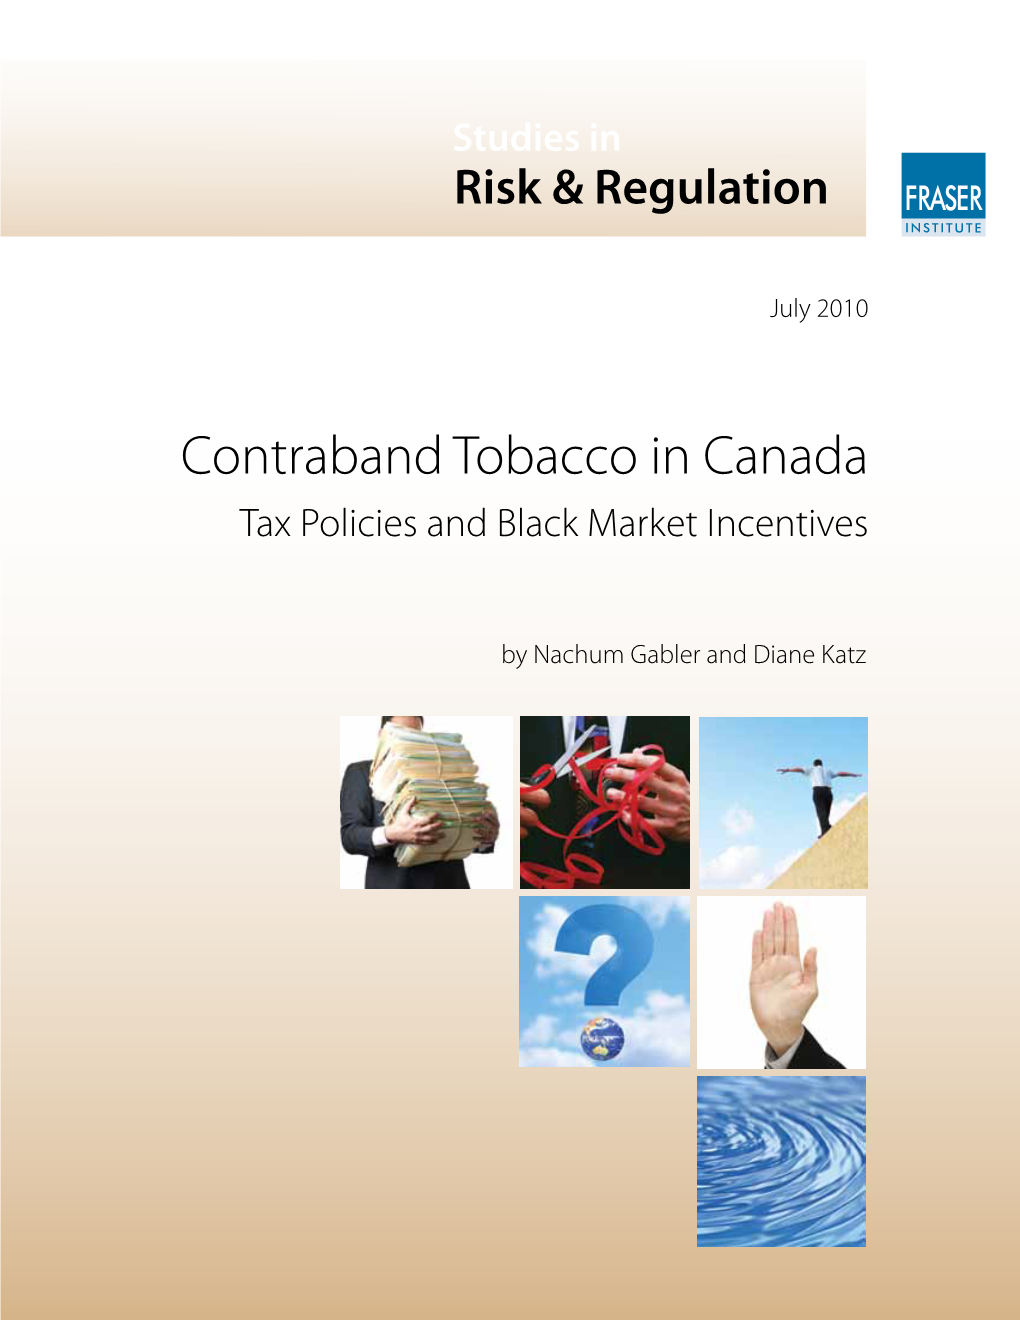 Contraband Tobacco in Canada Tax Policies and Black Market Incentives